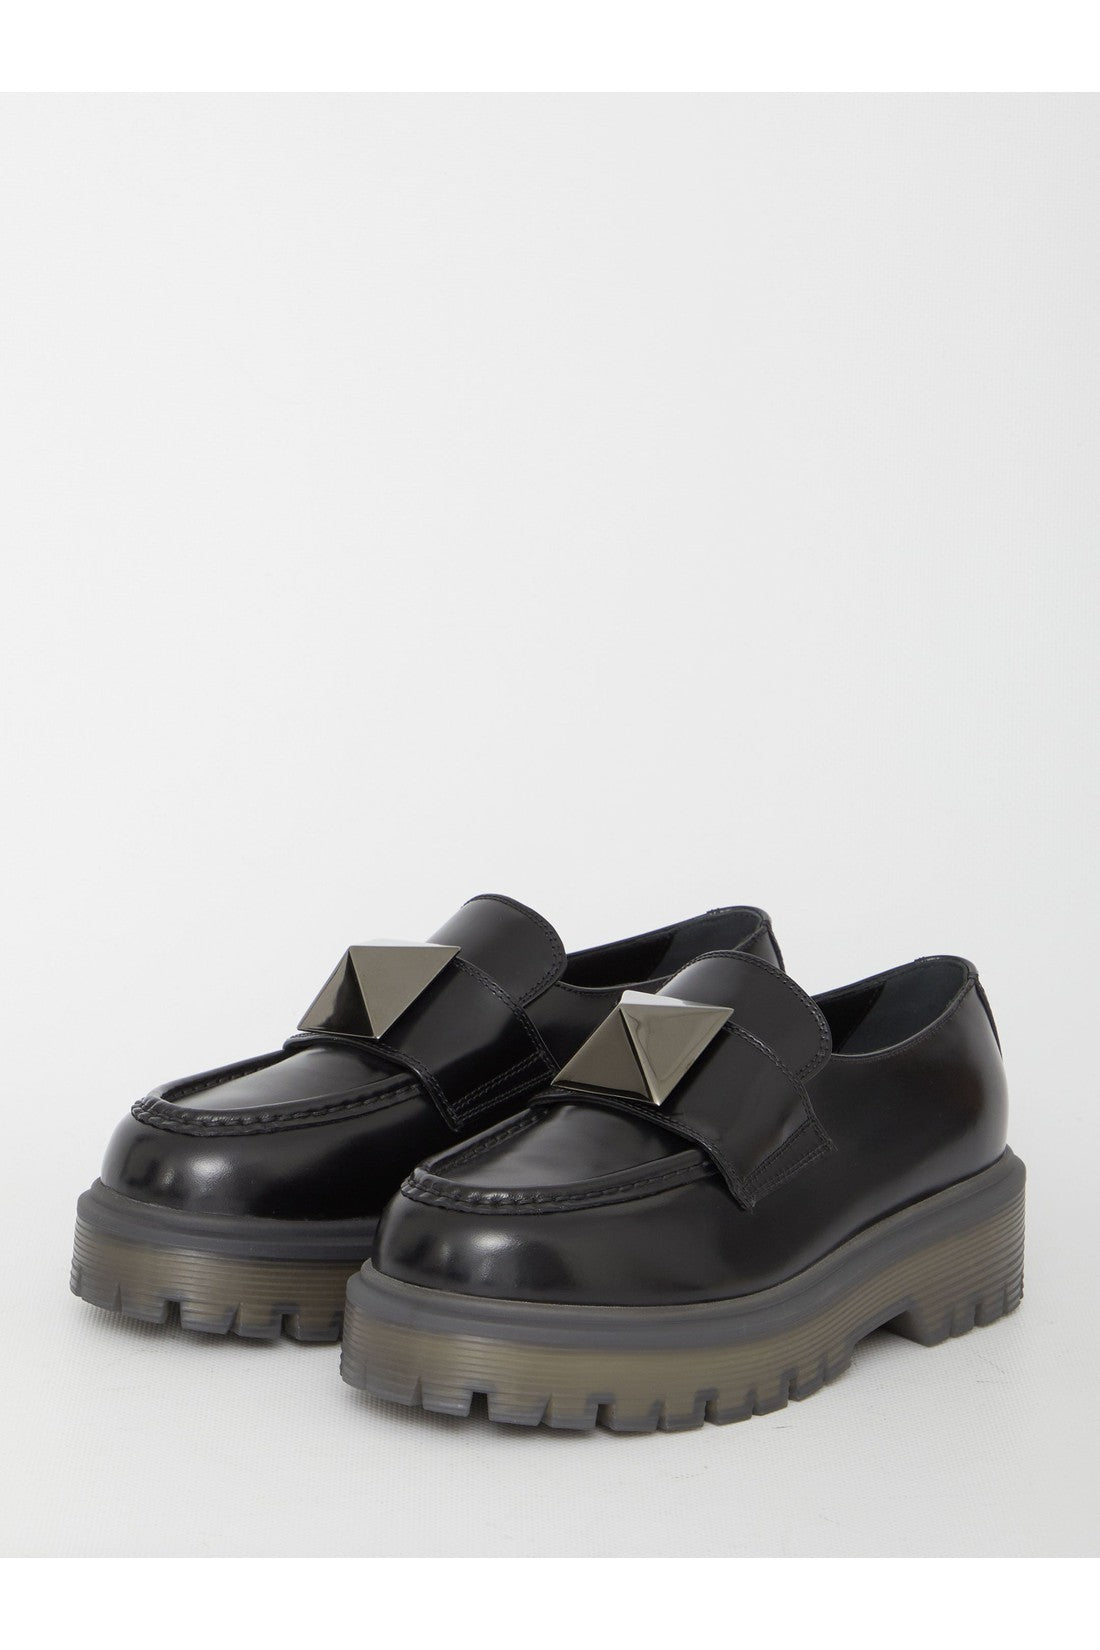 One Stud loafers